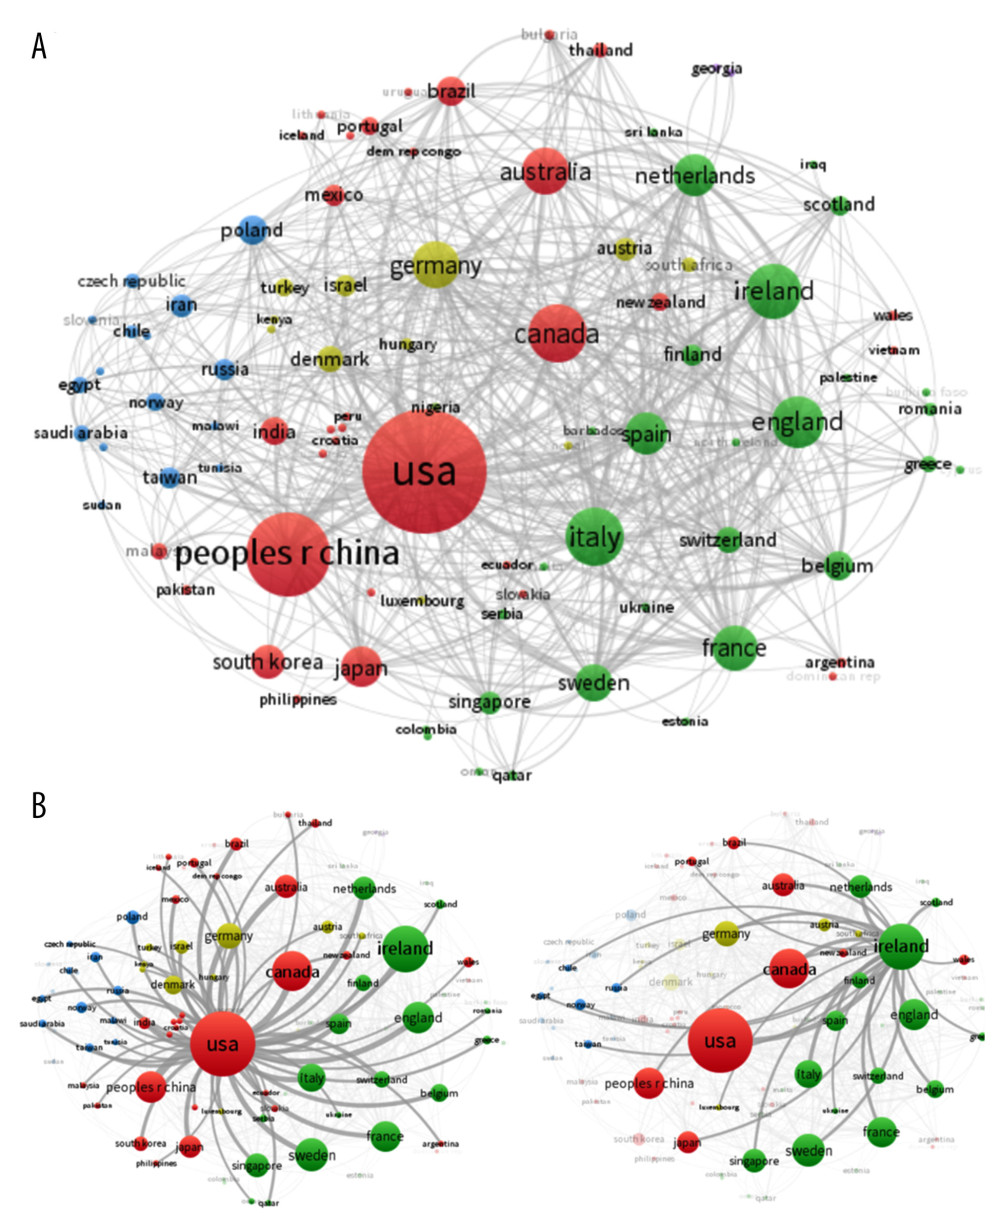 The documents on the microbiome-gut-brain axis (MGBA) in different countries/regions. (A) Map of the cooperation between 34 countries by the VOSviewer. (B) The cooperation between the United States and Ireland. Different colors indicate clusters of collaboration between countries, the size of the circle indicates citations to the publication, and the thickness of the line indicates the extent of collaboration. The network visualization was performed by VOSviewer (version 1.6.15; Centre for Science and Technology Studies, Leiden University, the Netherlands).